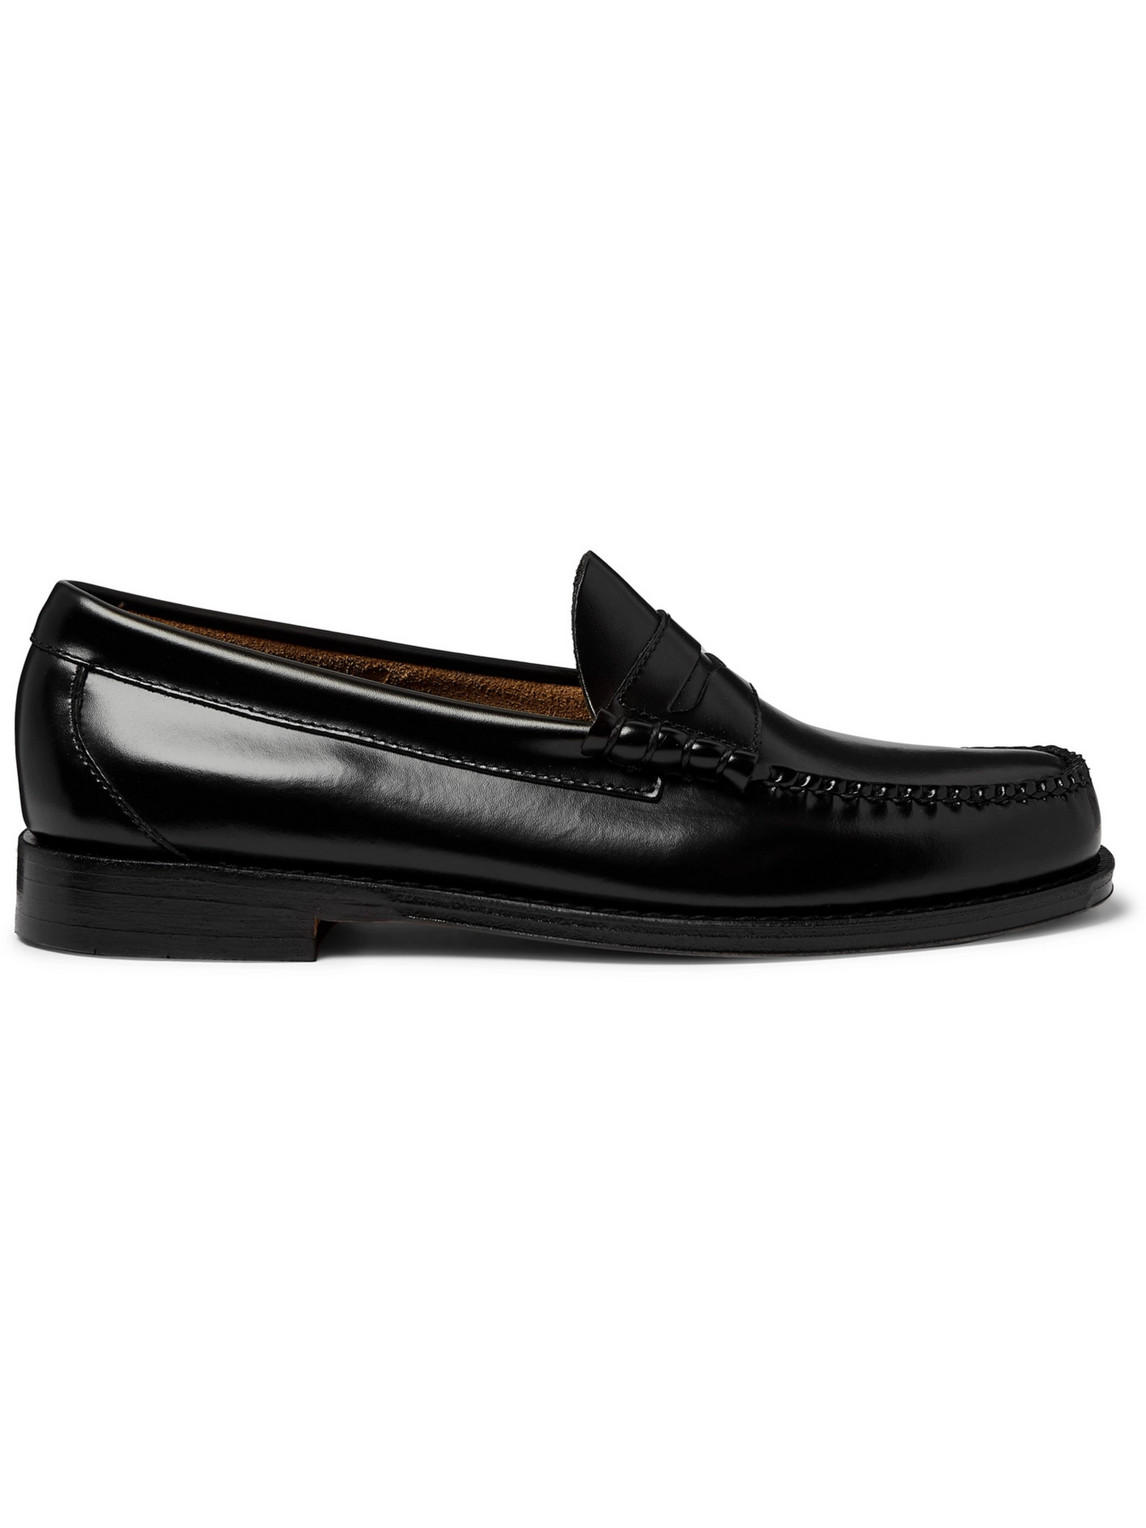 G.H. Bass & Co. - Weejuns Heritage Larson Leather Penny Loafers - Men - Black - UK 9 von G.H. Bass & Co.